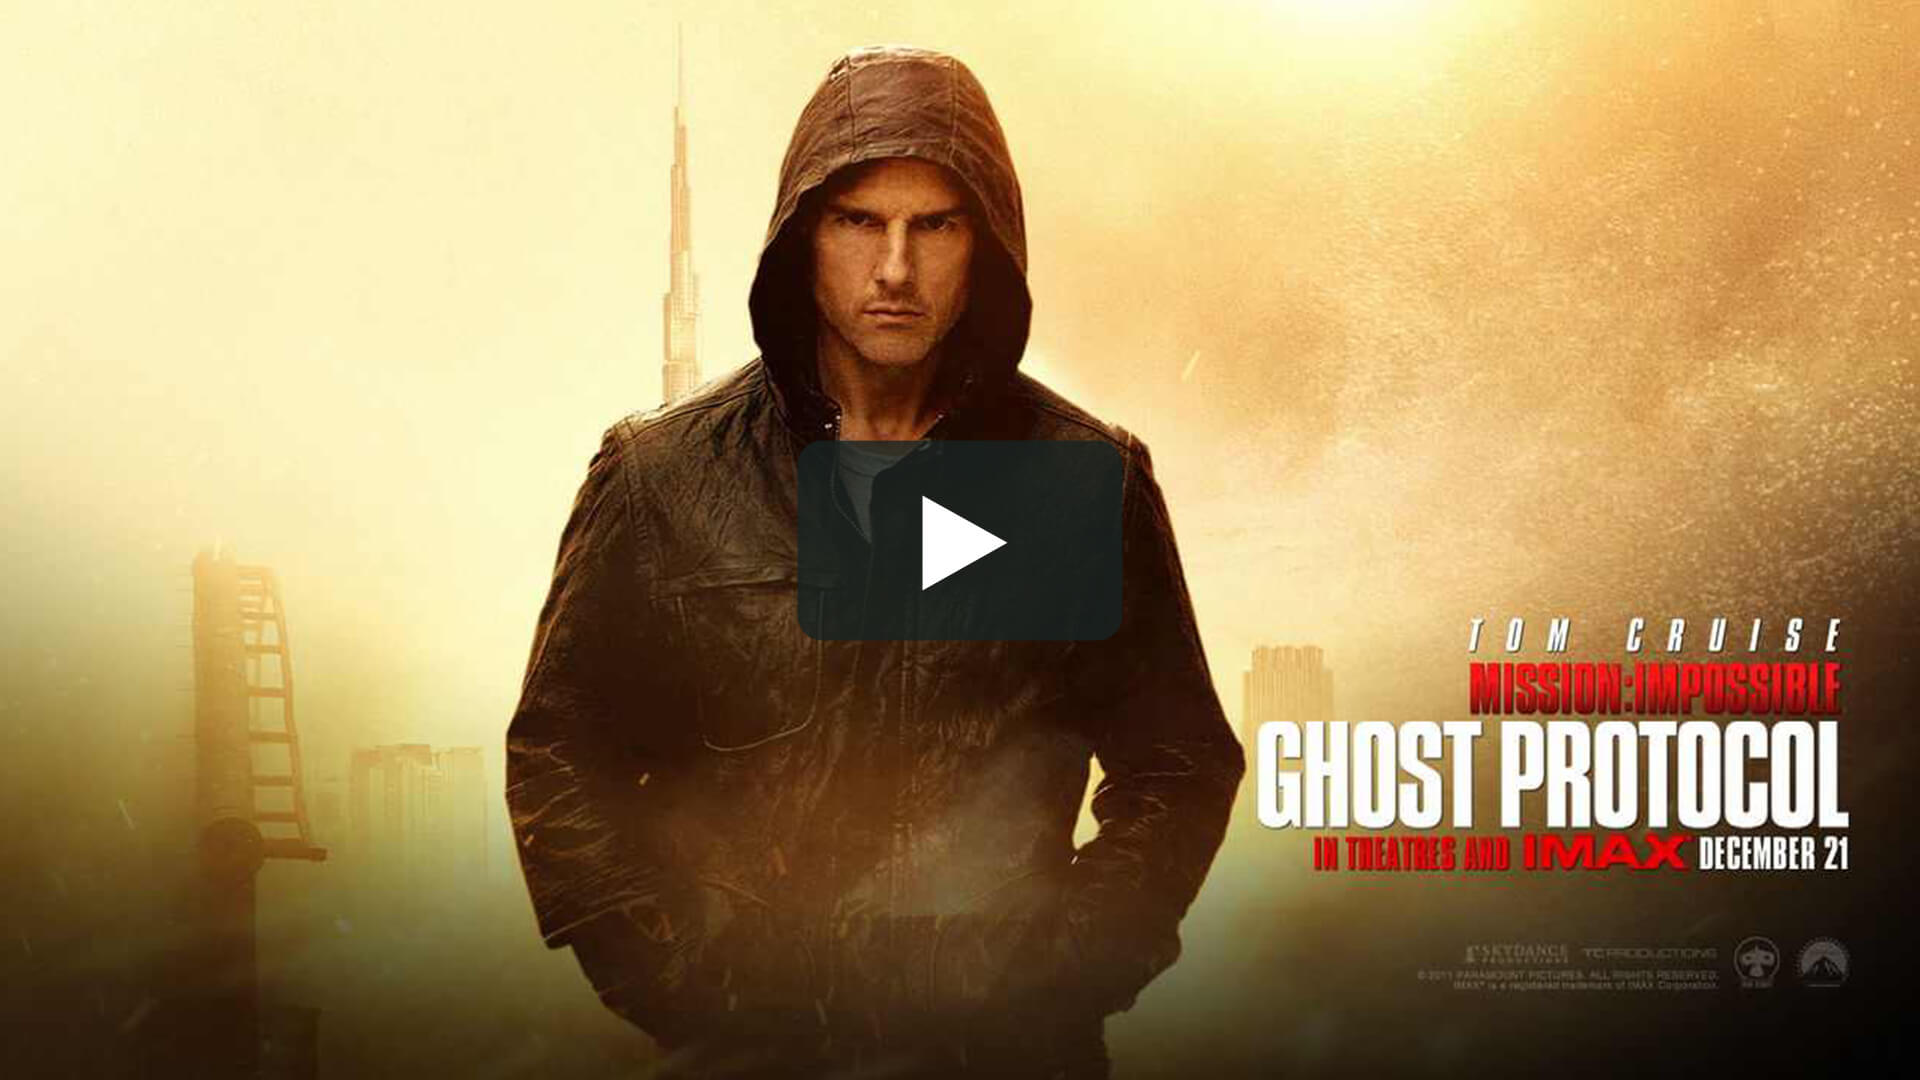 Mission: Impossible - Ghost Protocol  - 碟中諜4